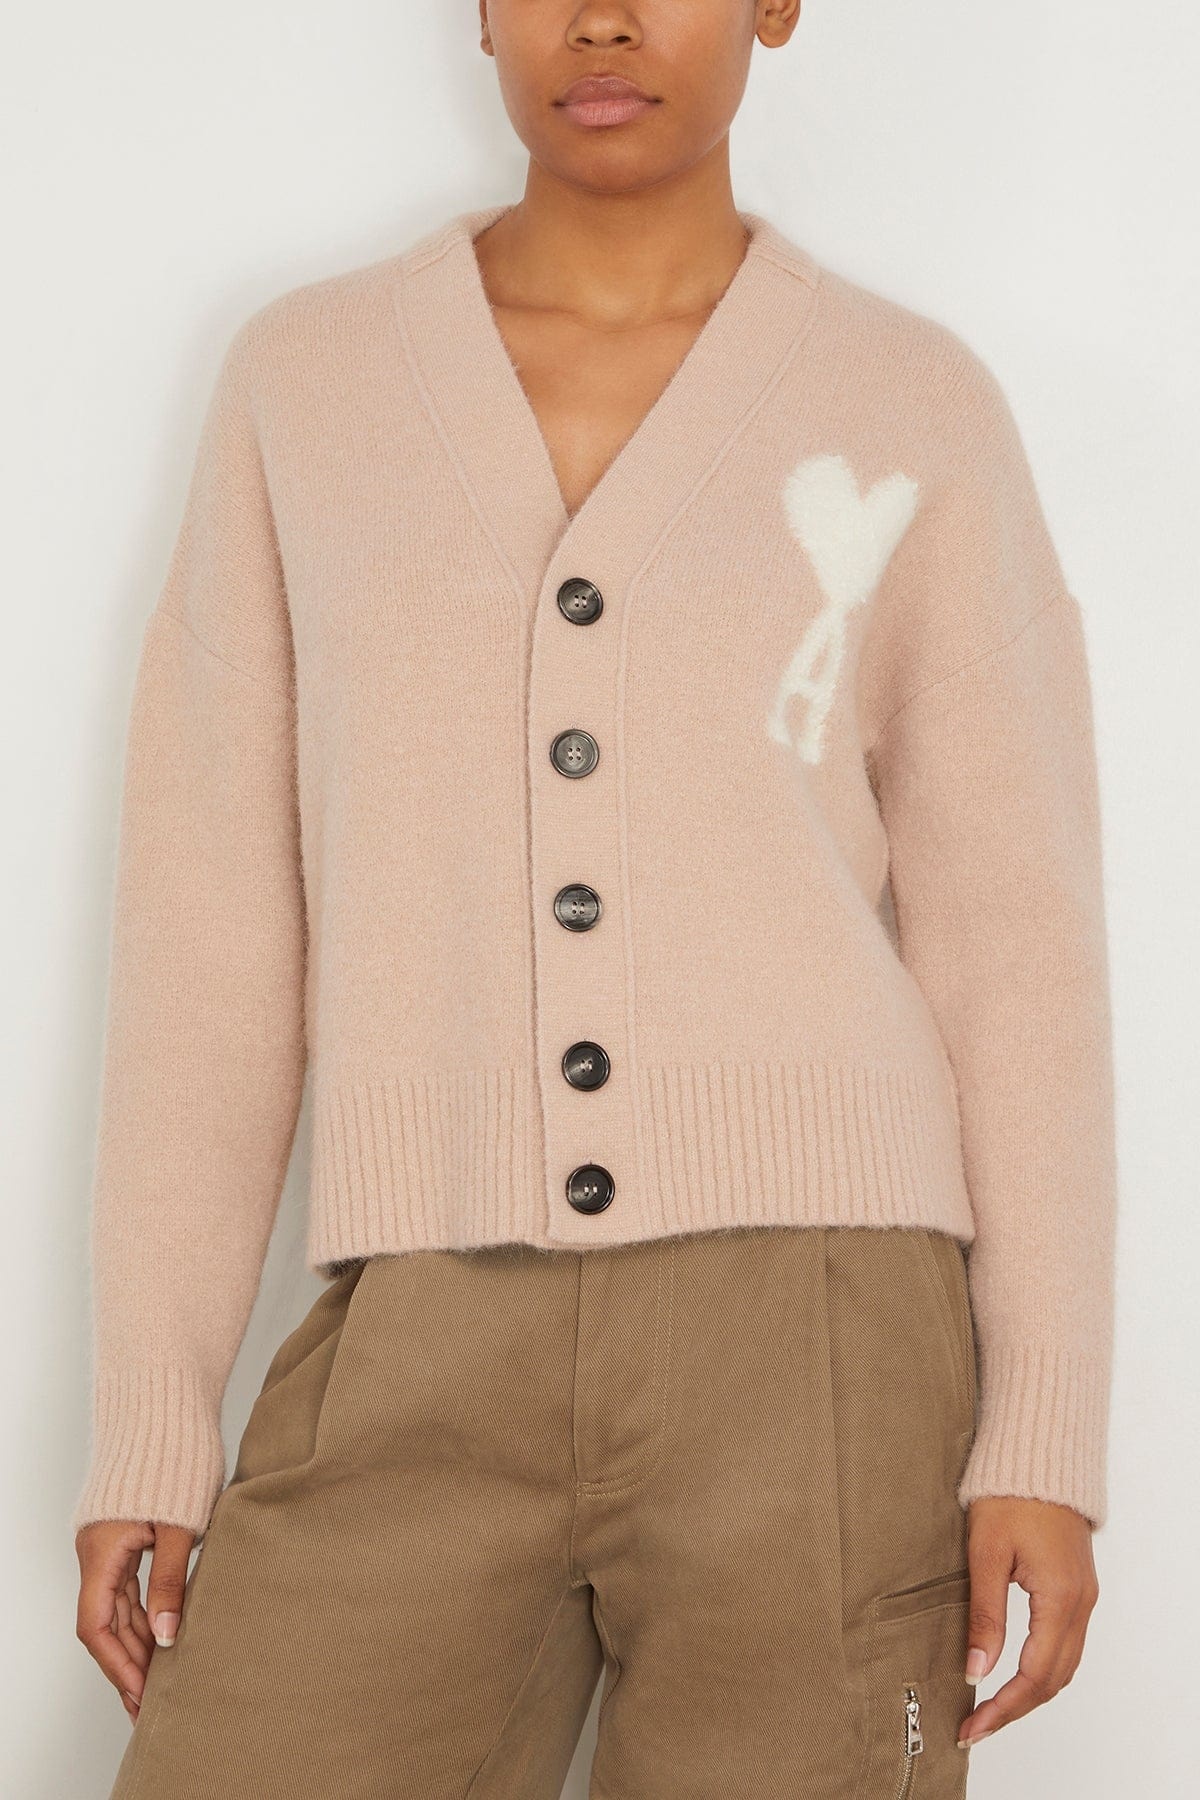 Off White ADC Cardigan in Powder Pink/Ivory - 3